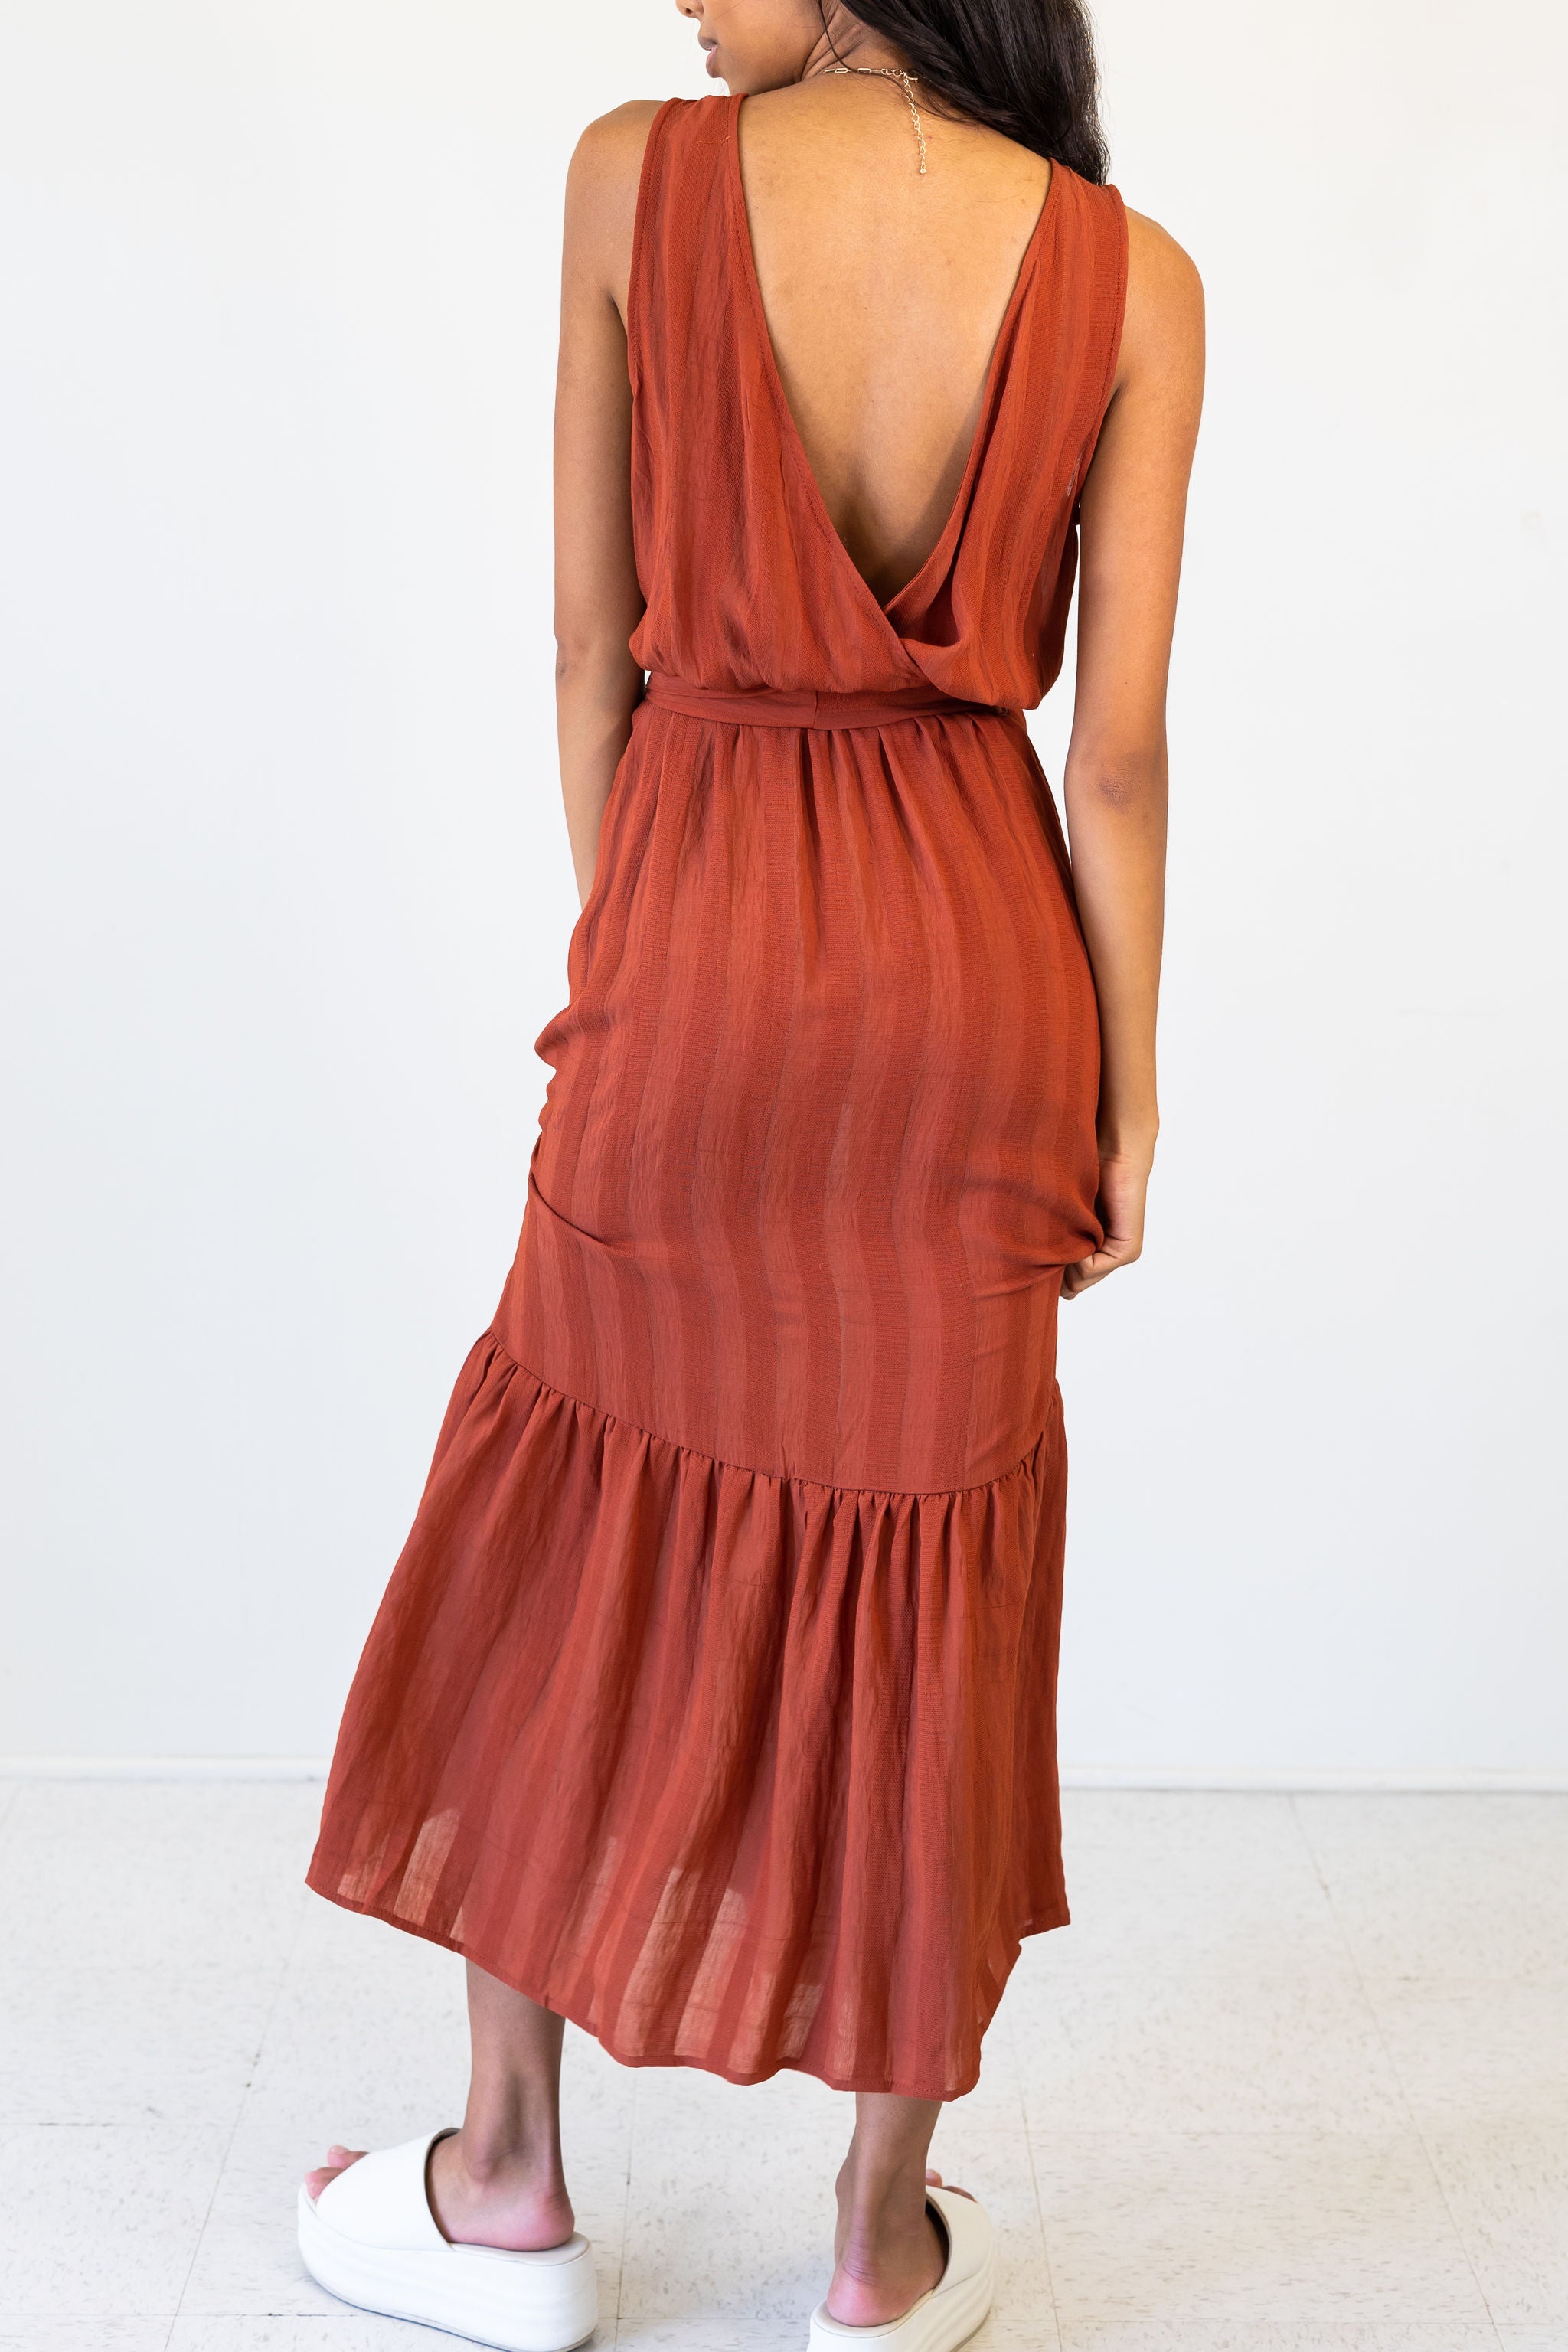 Felt Alive Maxi Dress by For Good